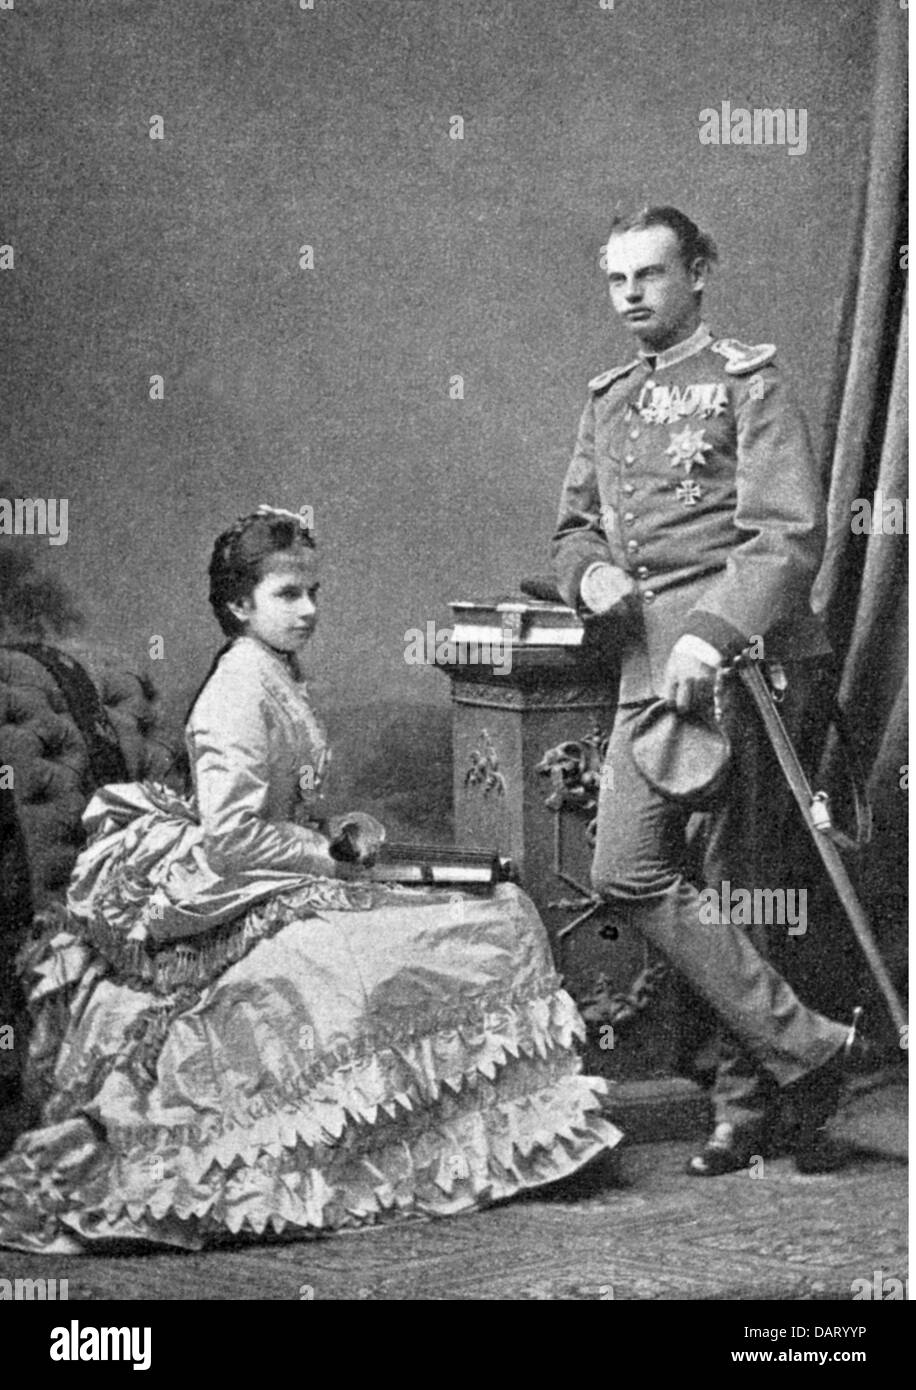 Leopold, 9.2.1846 - 28.9.1930, Prince of Bavaria, German general, full length, with fiance Archduchess Gisela of Austria, photograph by Eduard Ellinger, Pest, 1873, Stock Photo